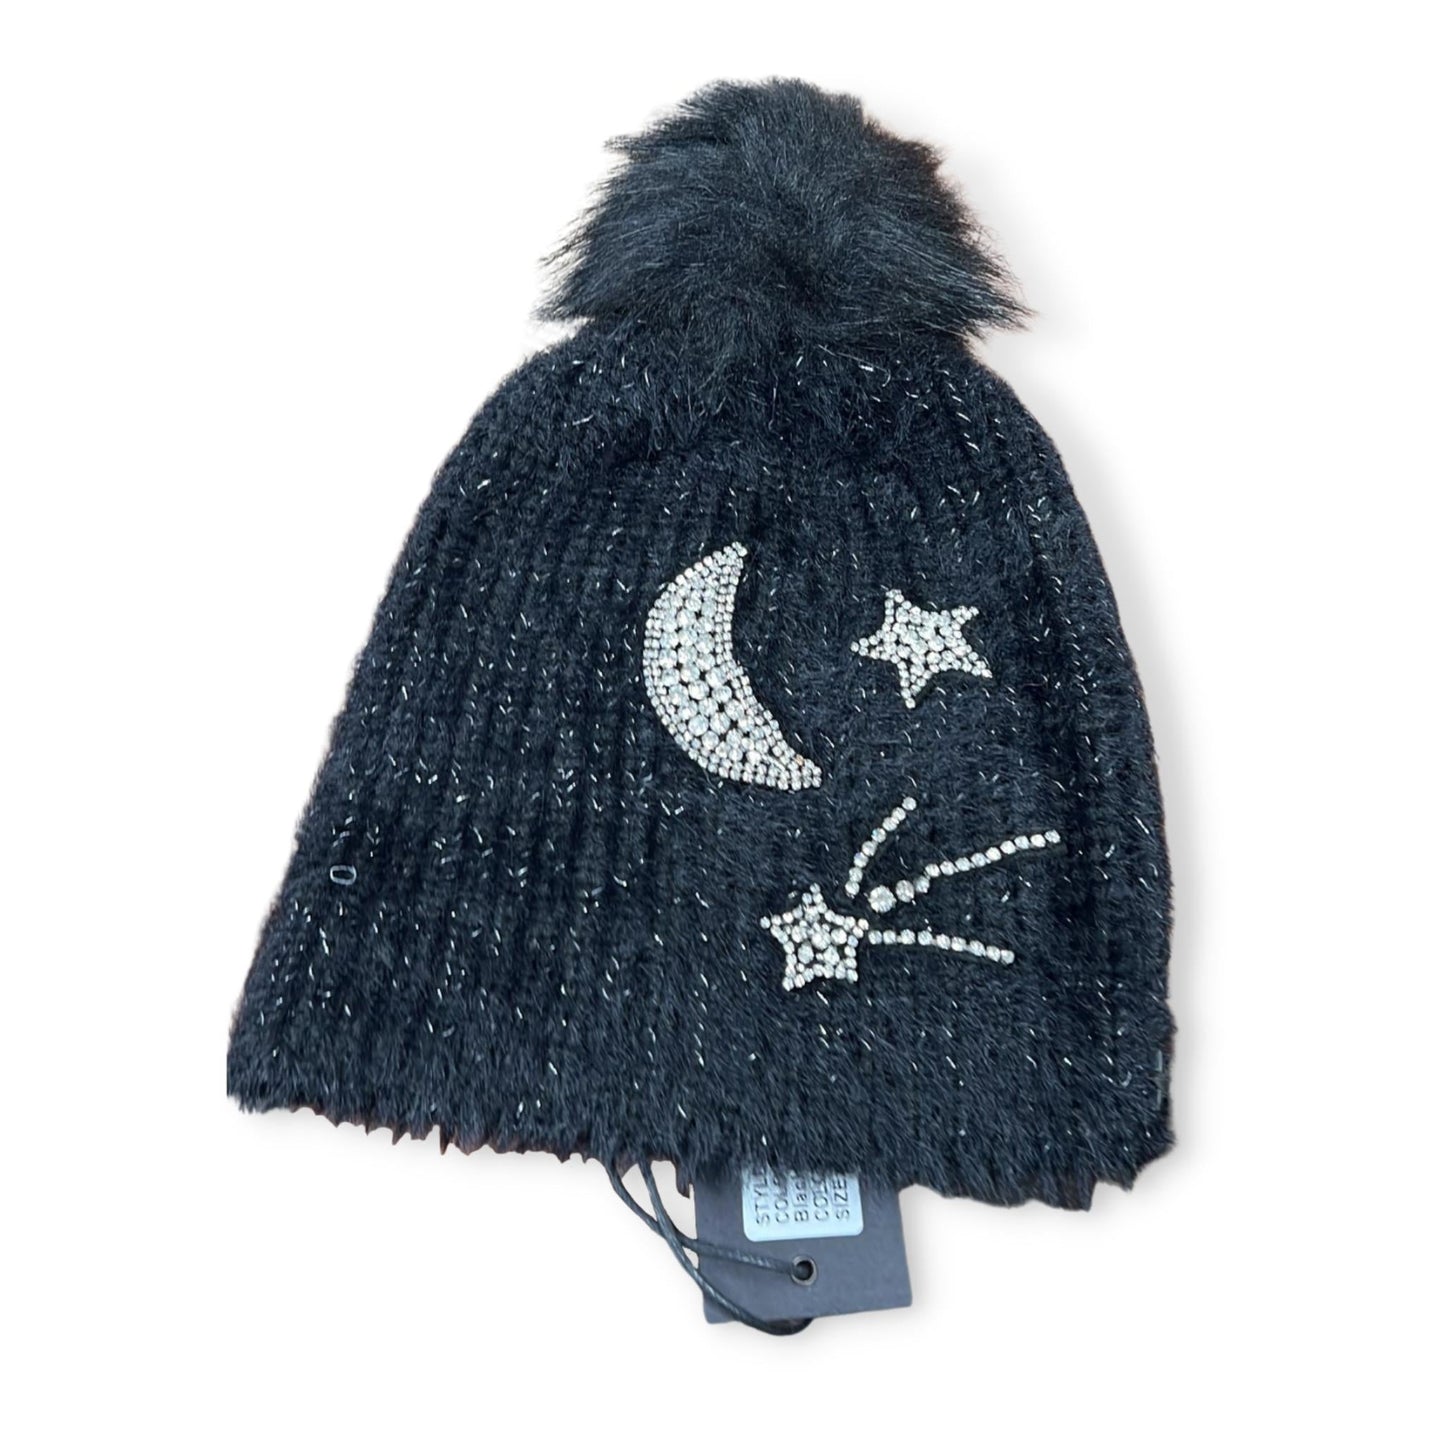 Jocelyn Black Angora Knit Hat with Crystal Moon & Stars - a Spirit Animal - Hats $90-$120 accessories active Sep 2022